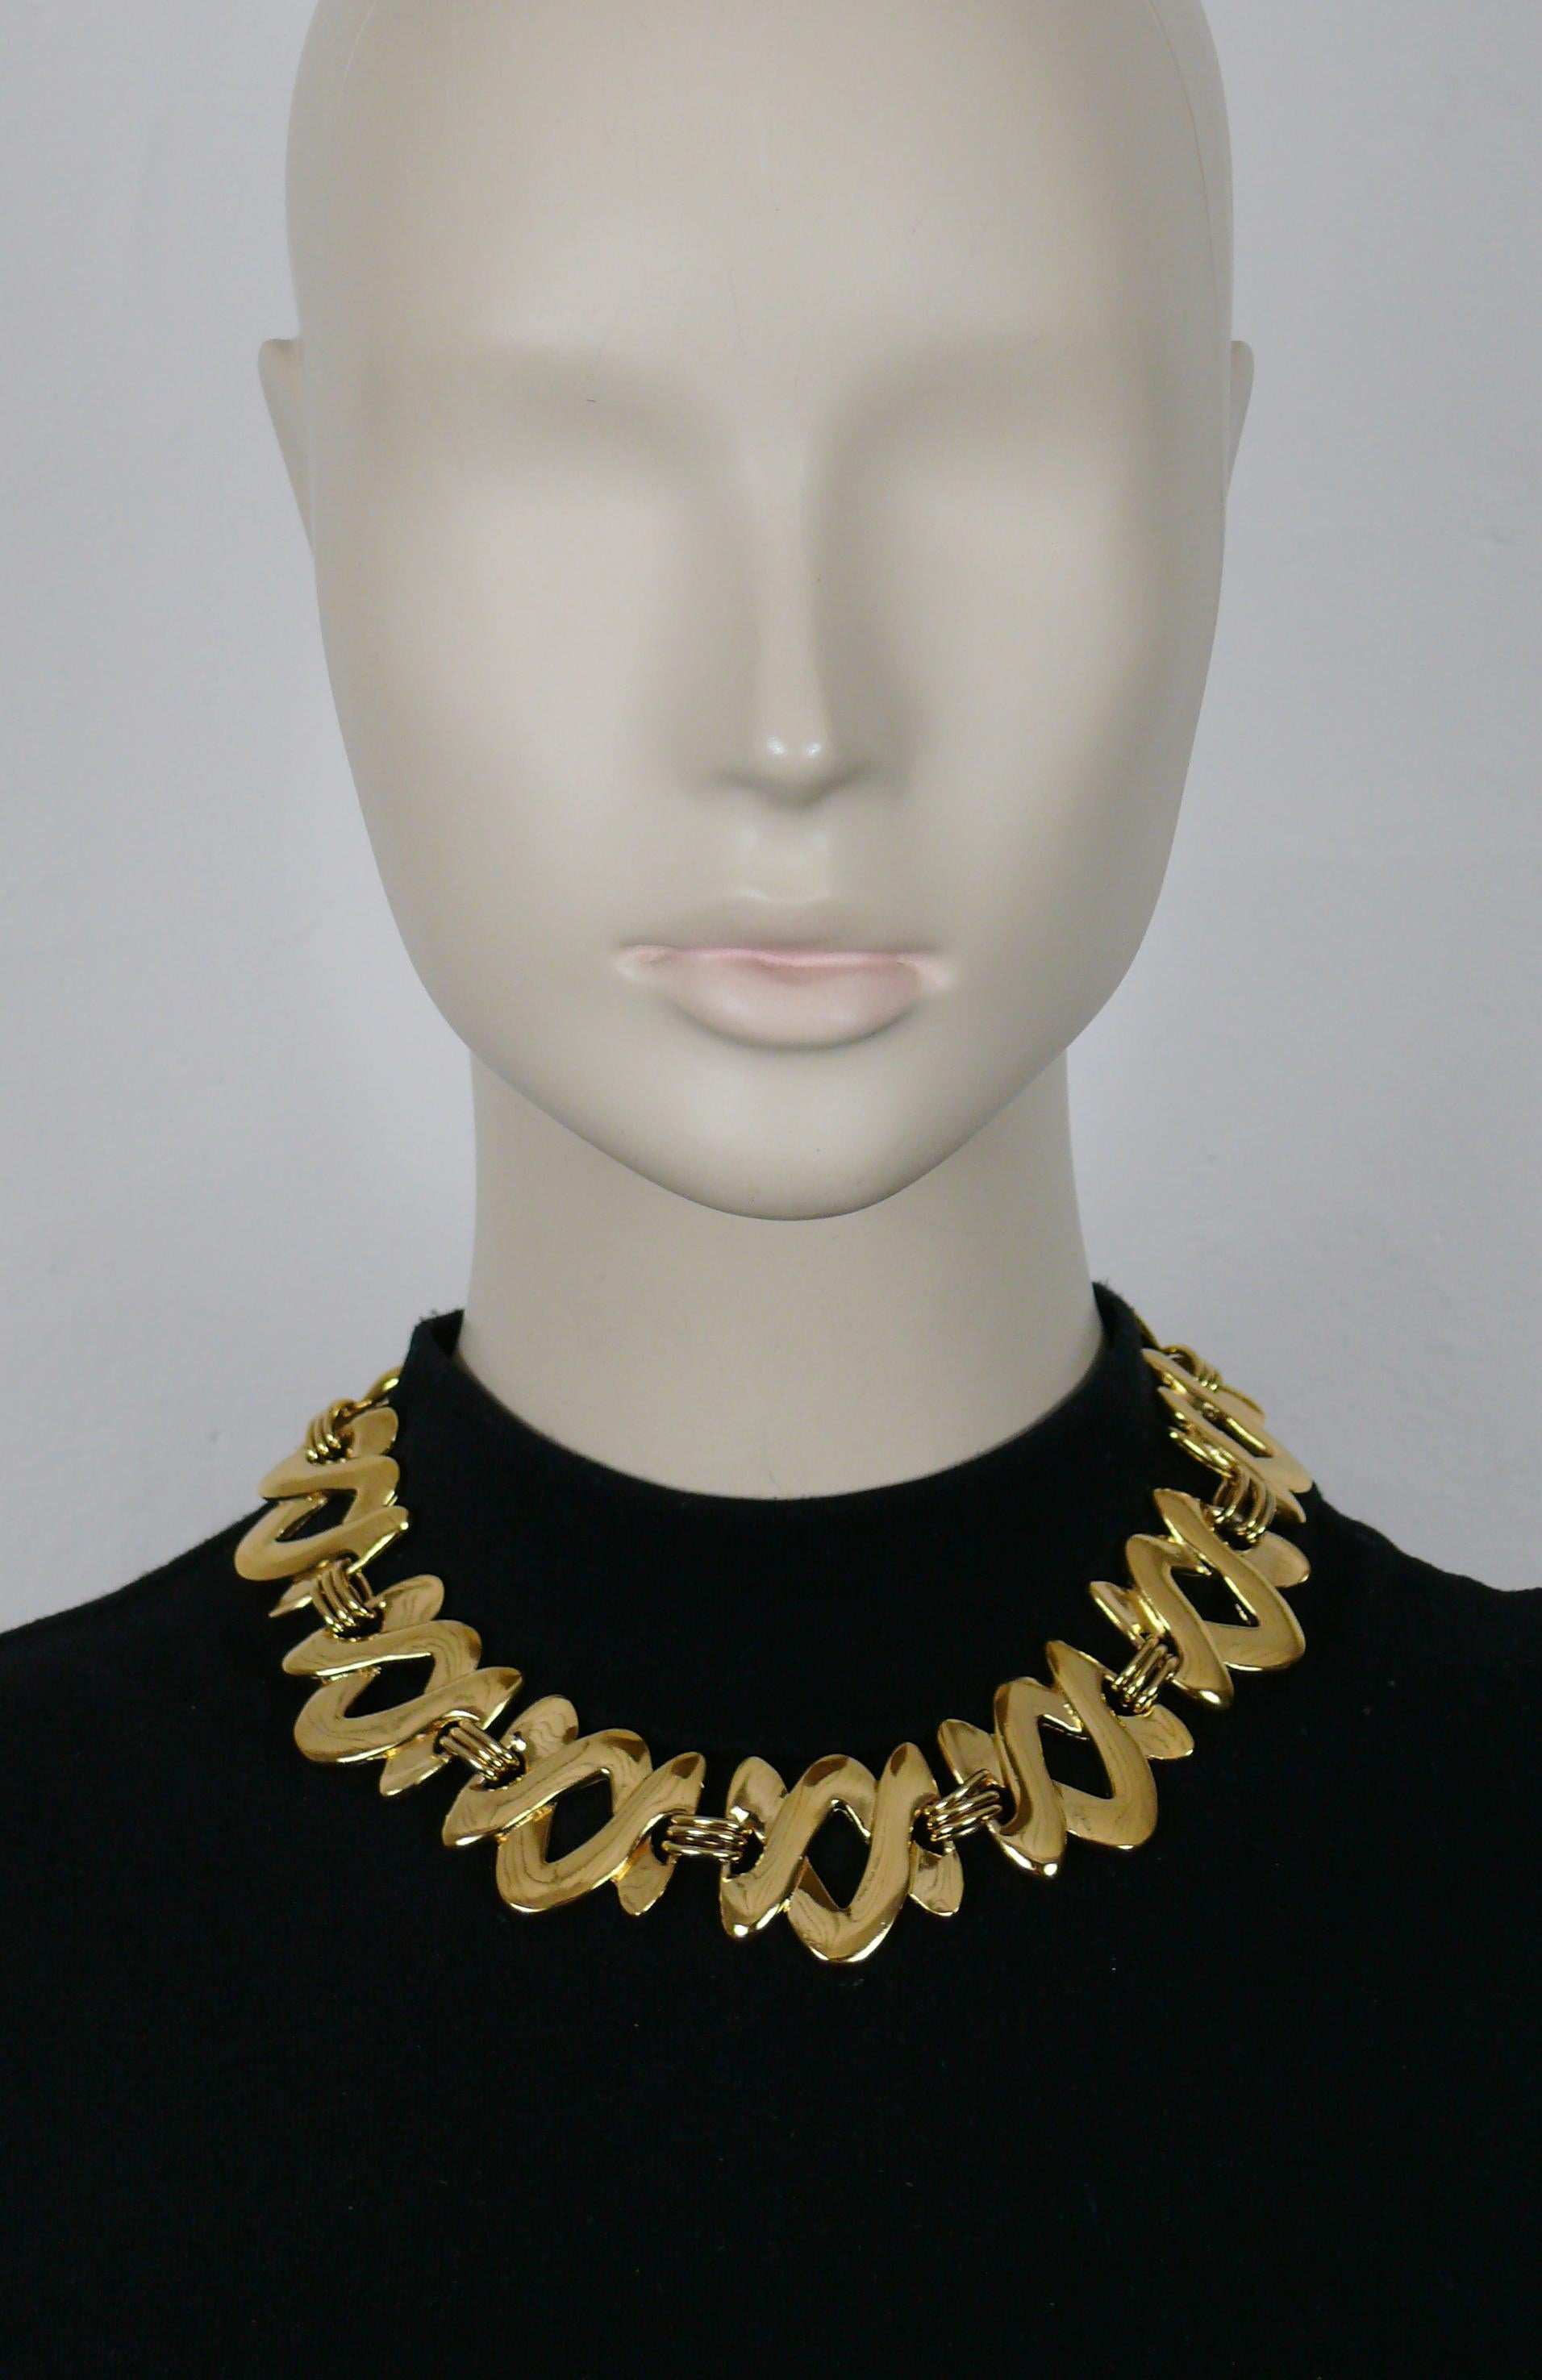 CHRISTIAN DIOR Boutique vintage gold tone necklace featuring wavy links.

T-bar and toggle closure.

Embossed CHRISTIAN DIOR Boutique.

Indicative measurements : length approx. 43.5 cm (17.13 inches) / width approx. 3.3 cm (1.30 inches).

Comes with